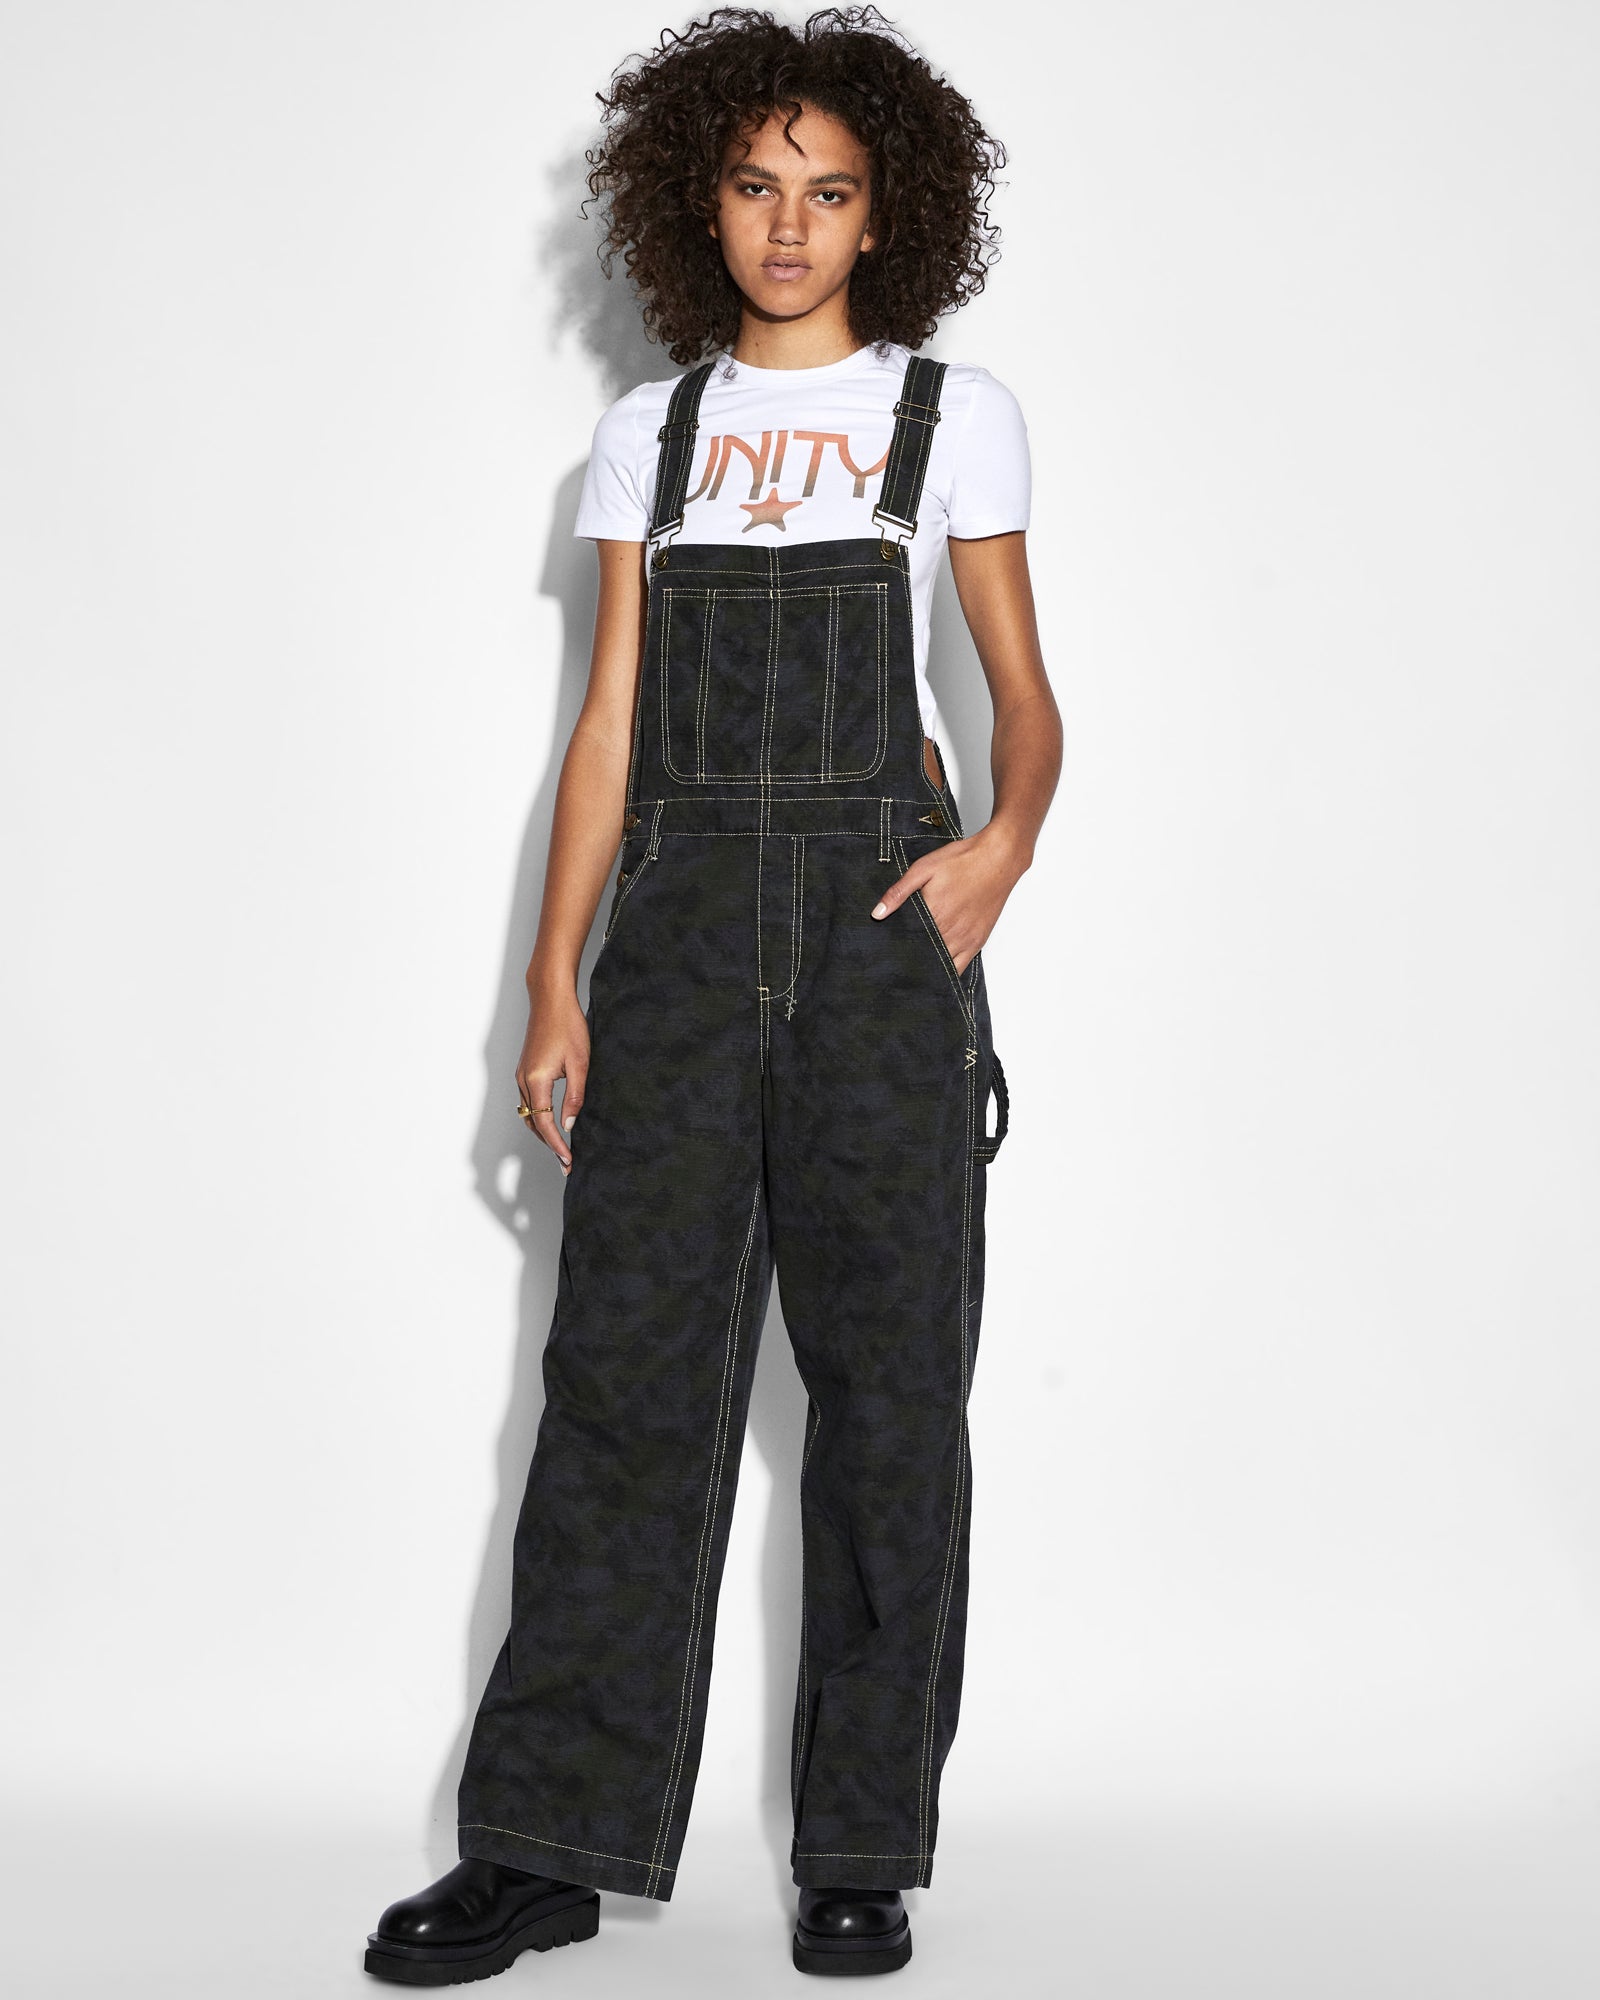 Designer Black Jeans And Dungaree Jumpsuit For Women And Men Plus Size,  Straight, Double Shoulder, Fashionable Denim Design For Clubbing And  Everyday Wear From Bianvincentyg, $38.84